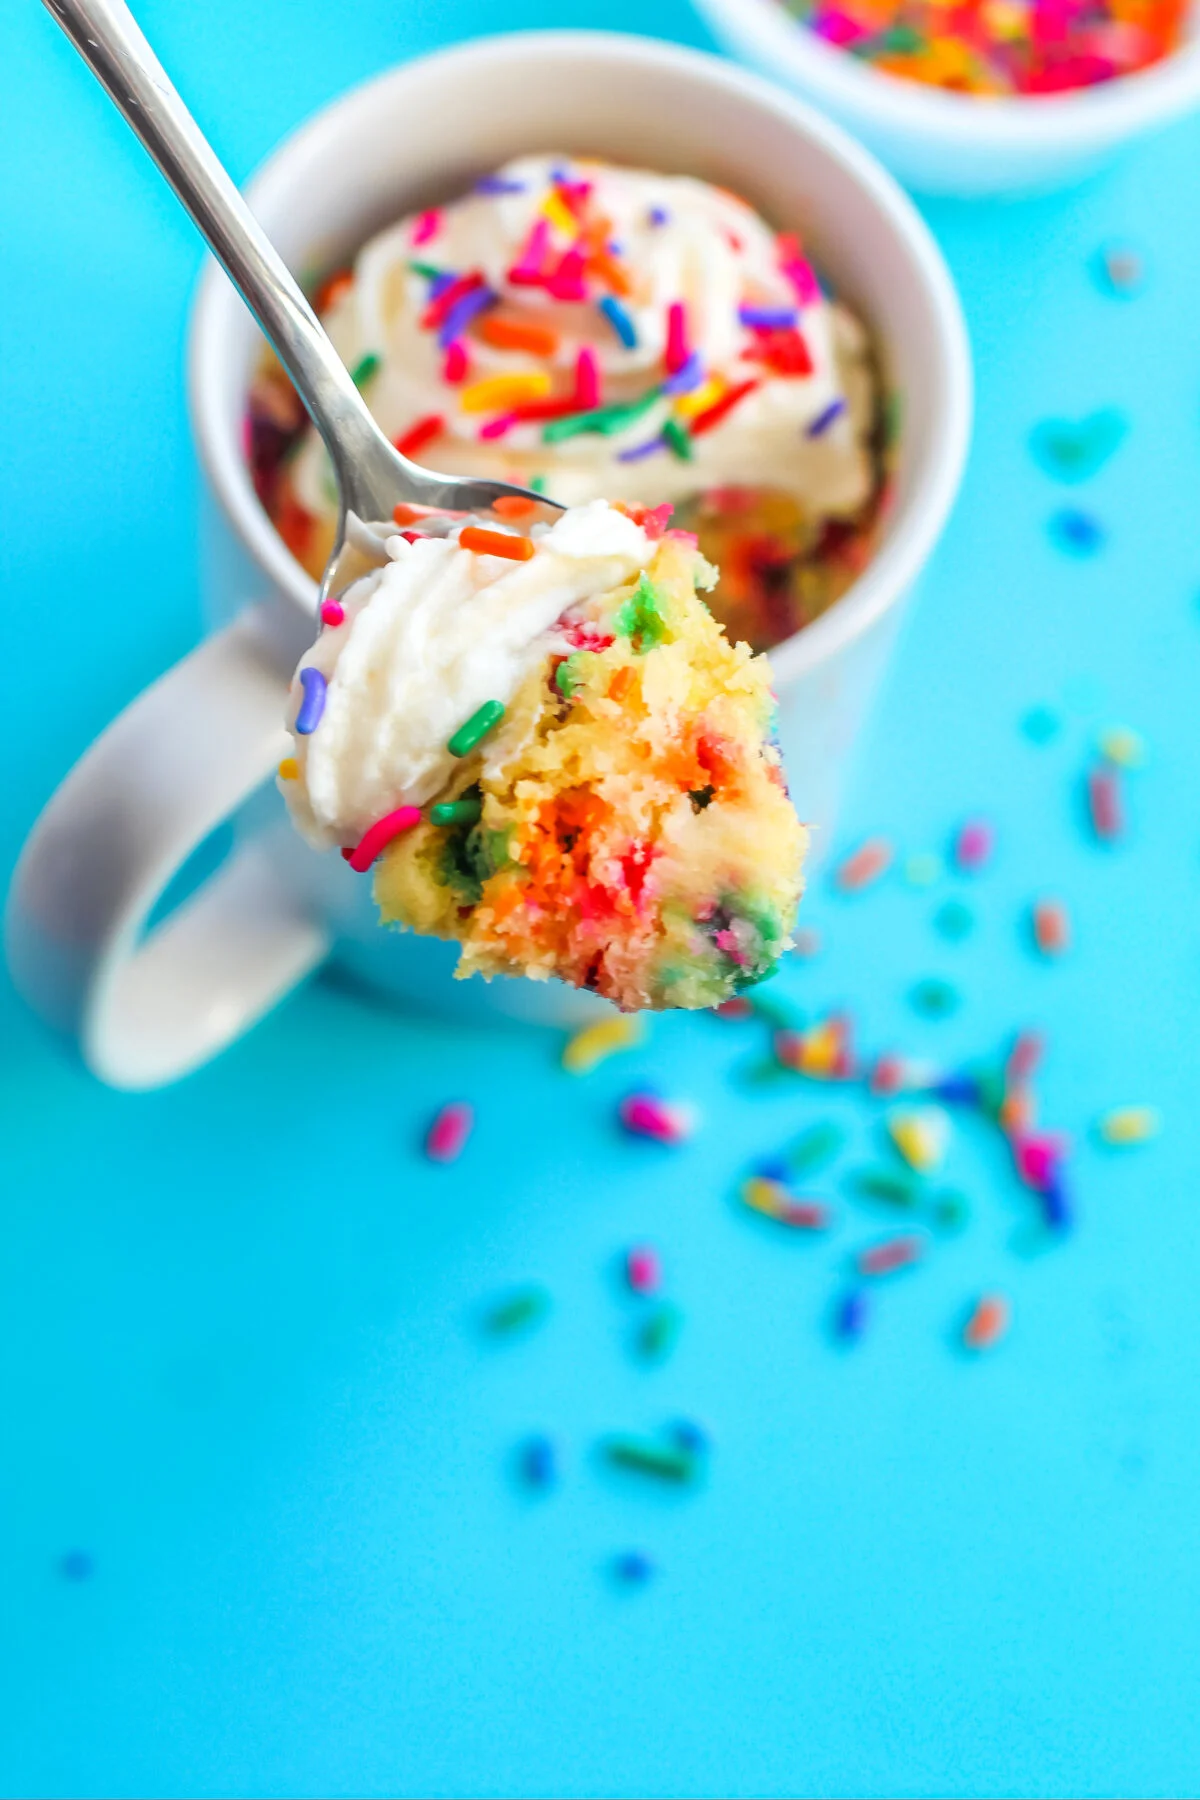 Make a funfetti mug cake that's moist, fluffy, and full of sprinkles. This single-serve cake recipe is easy to whip up in the microwave!